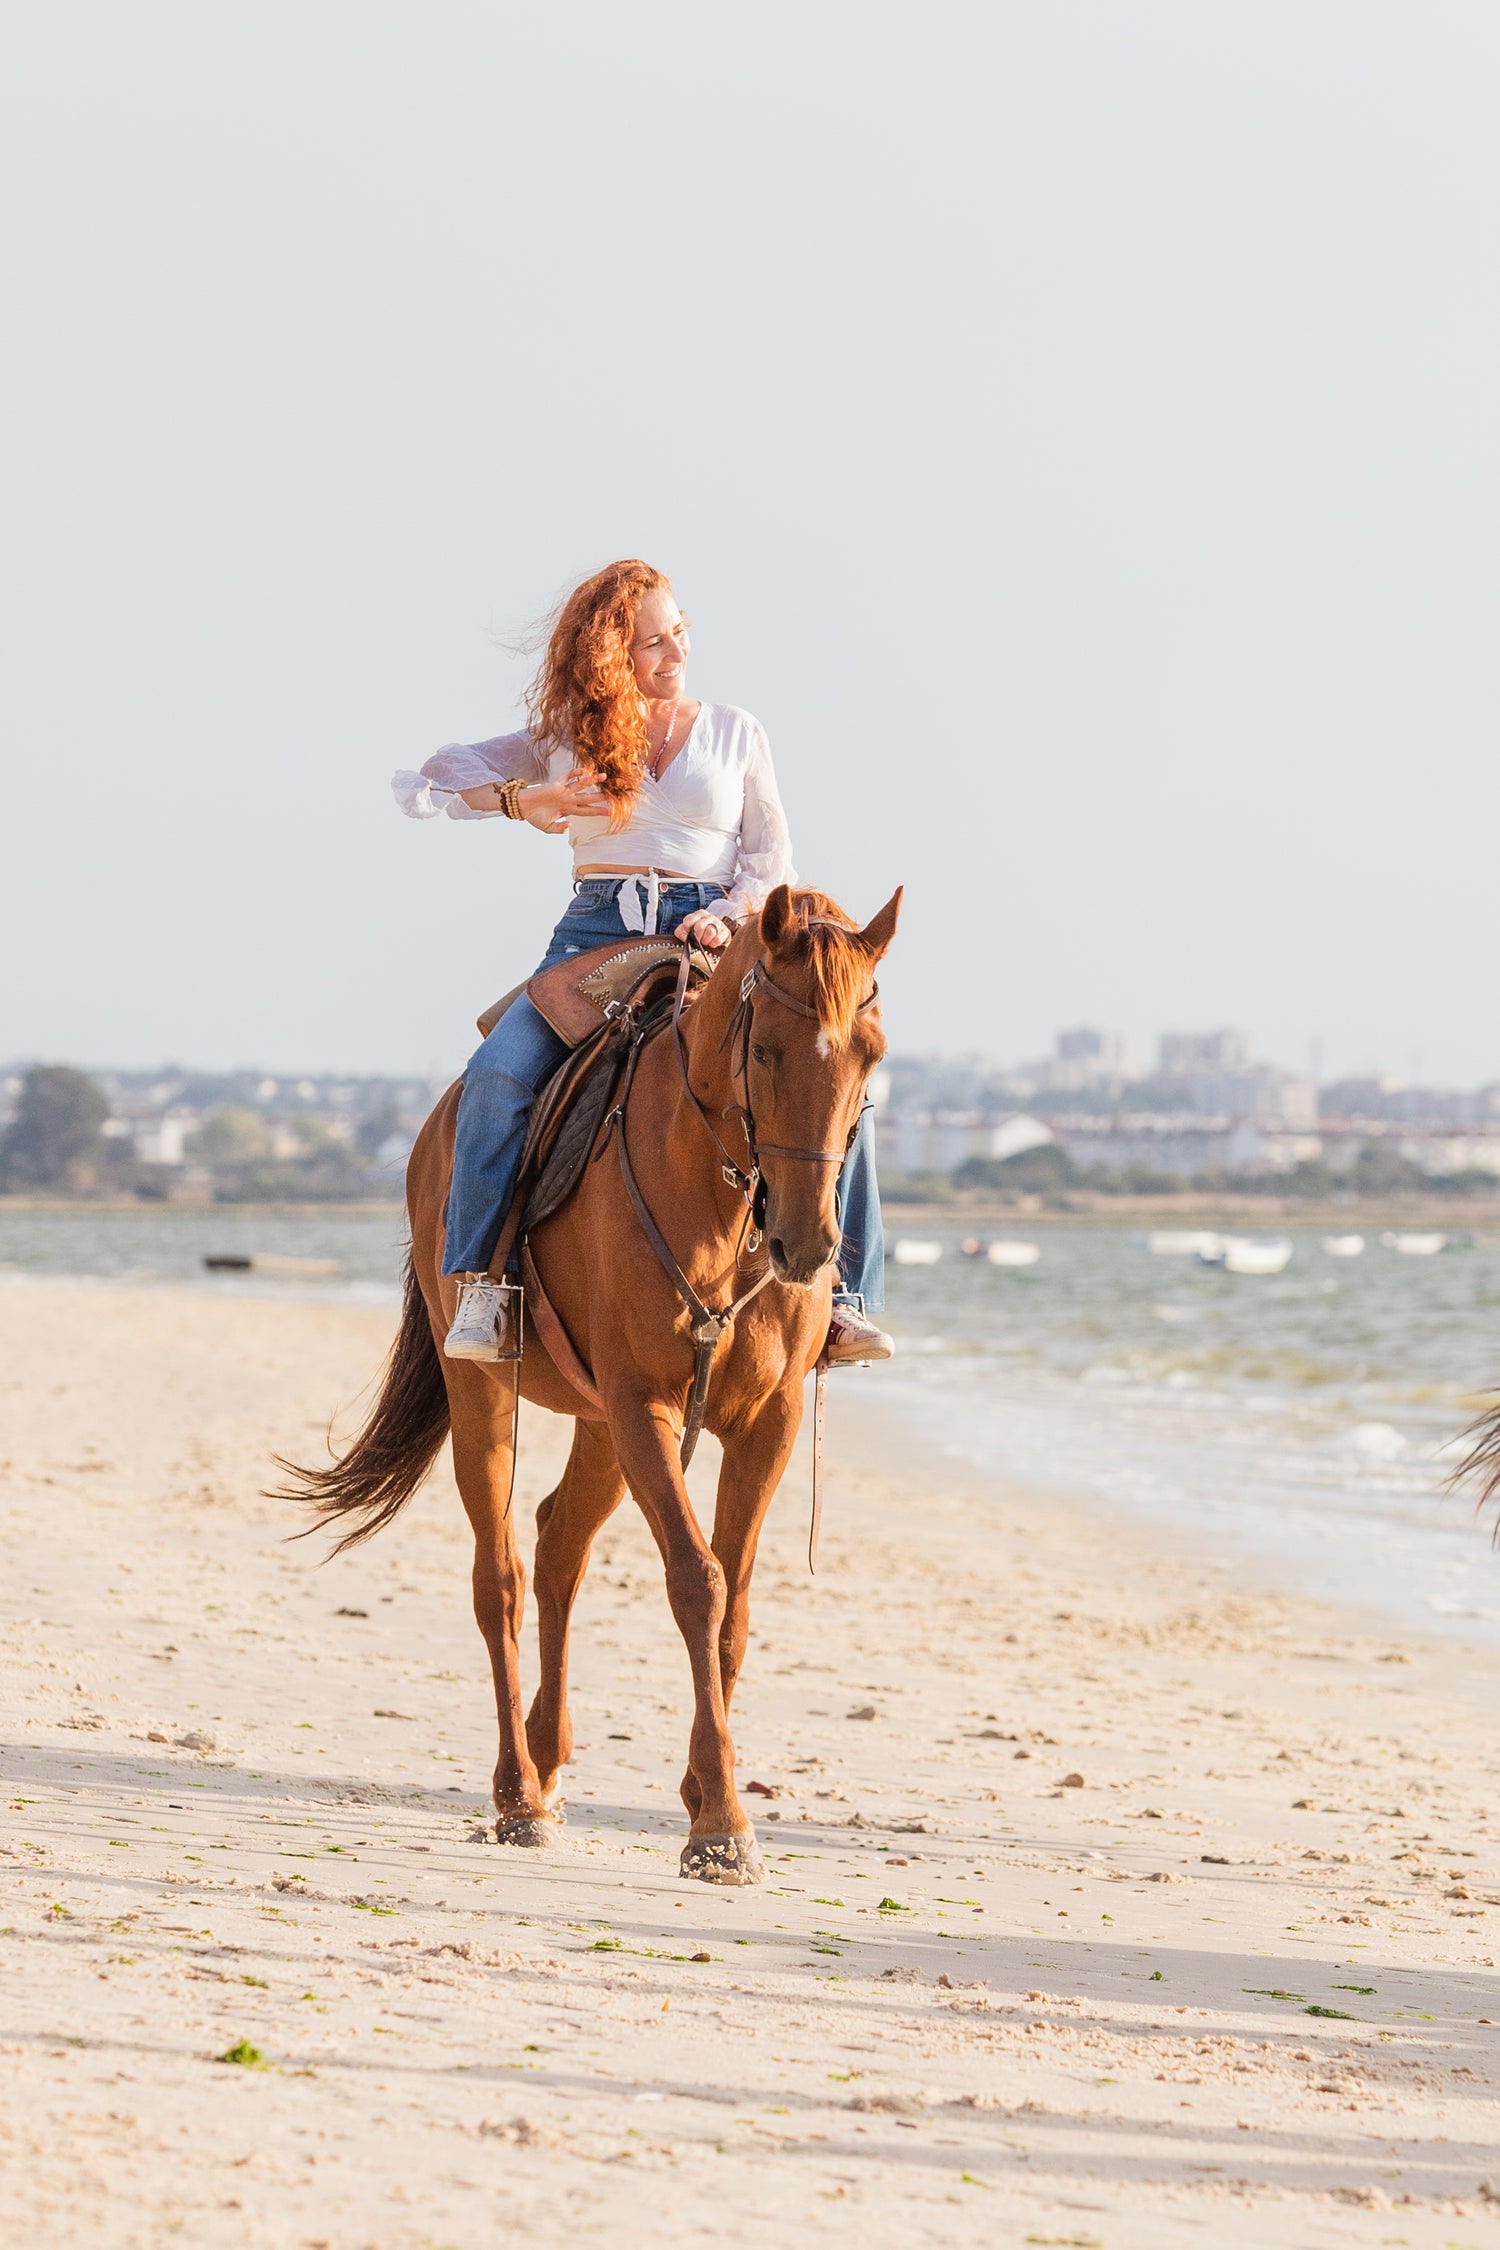 Horseback Riding on Pôr-Do-Sol Beach • 1h 30min • From 12 years old